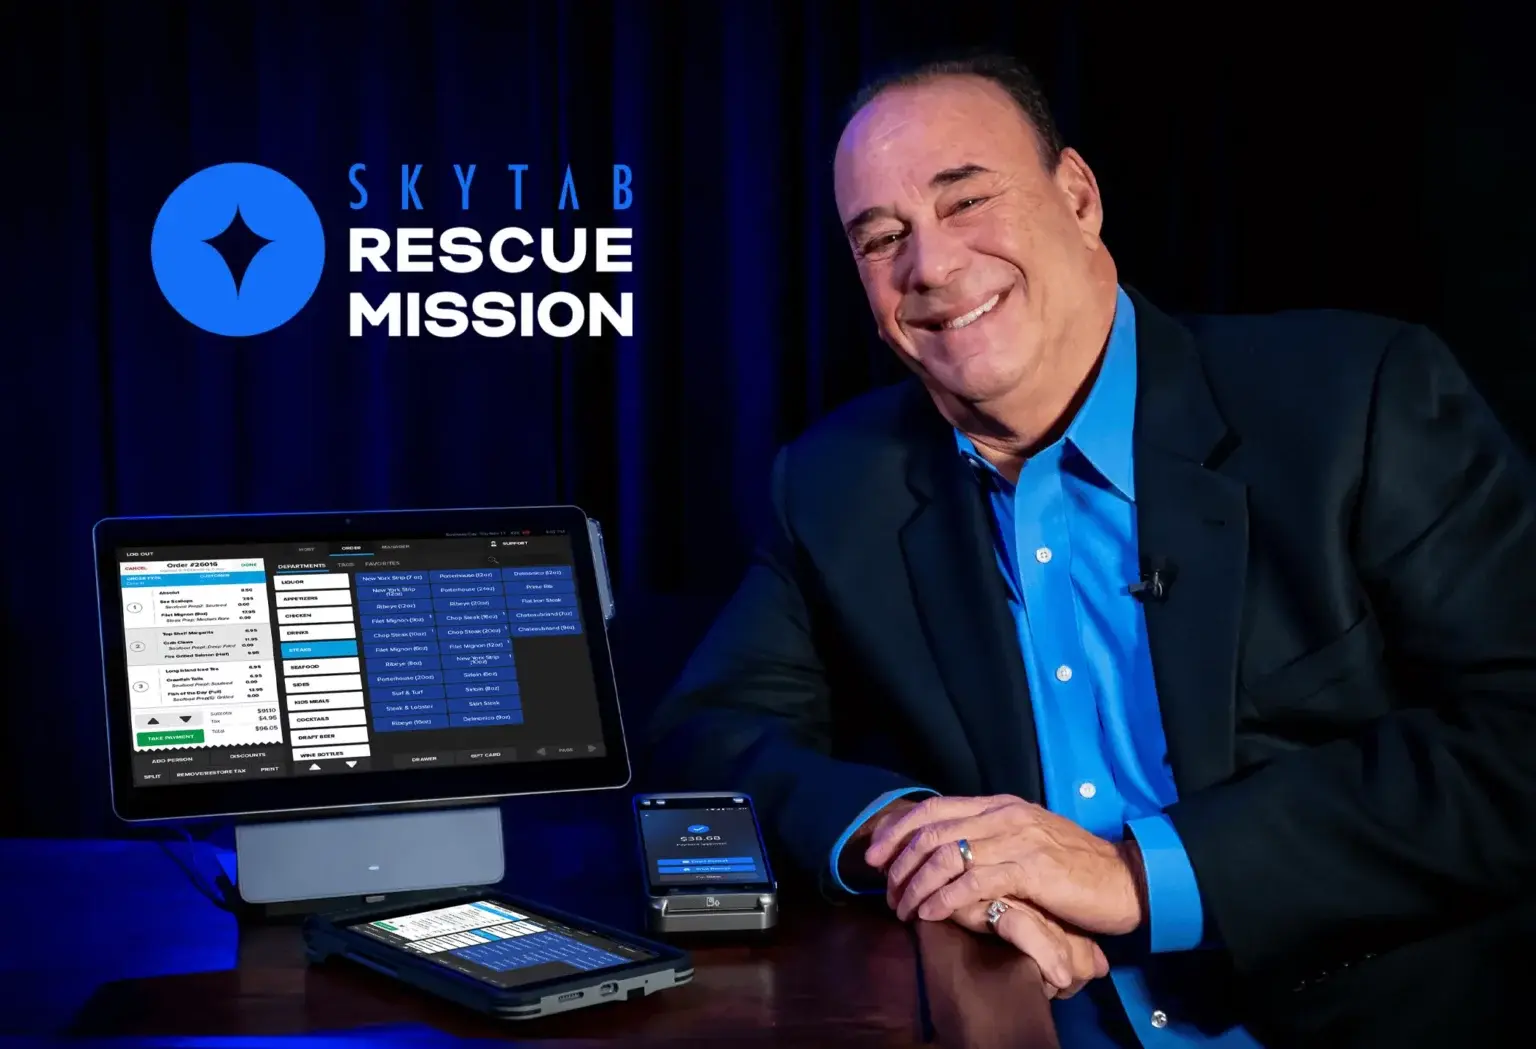 SkyTab Rescue Mission with Jon Taffer winner announcement